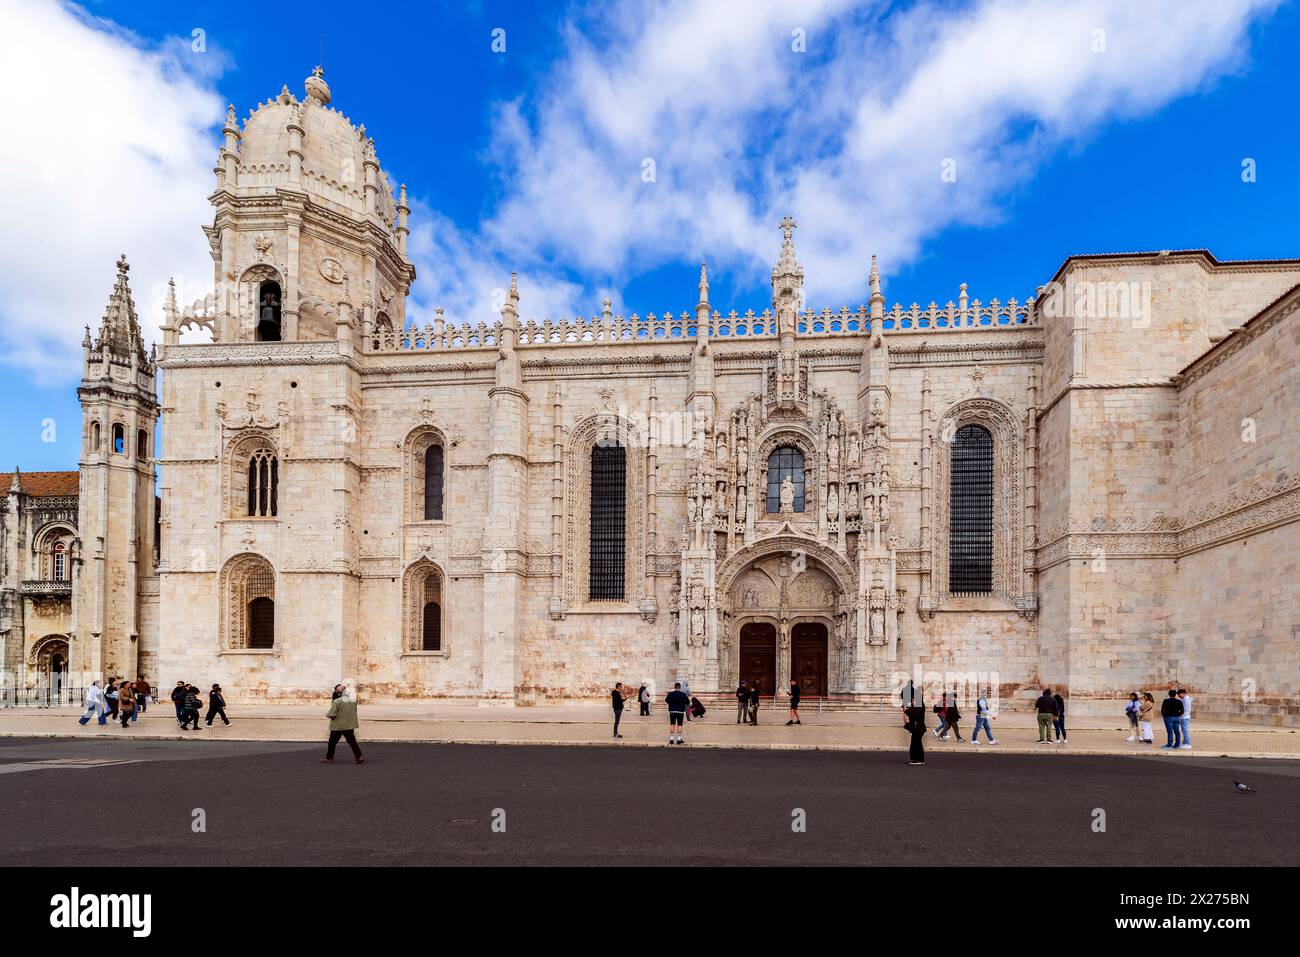 View of Jerónimos Monastery, parish of Belém in Lisbon. The Jerónimos Monastery is one of the finest examples of the late Gothic Manueline style of ar Stock Photo